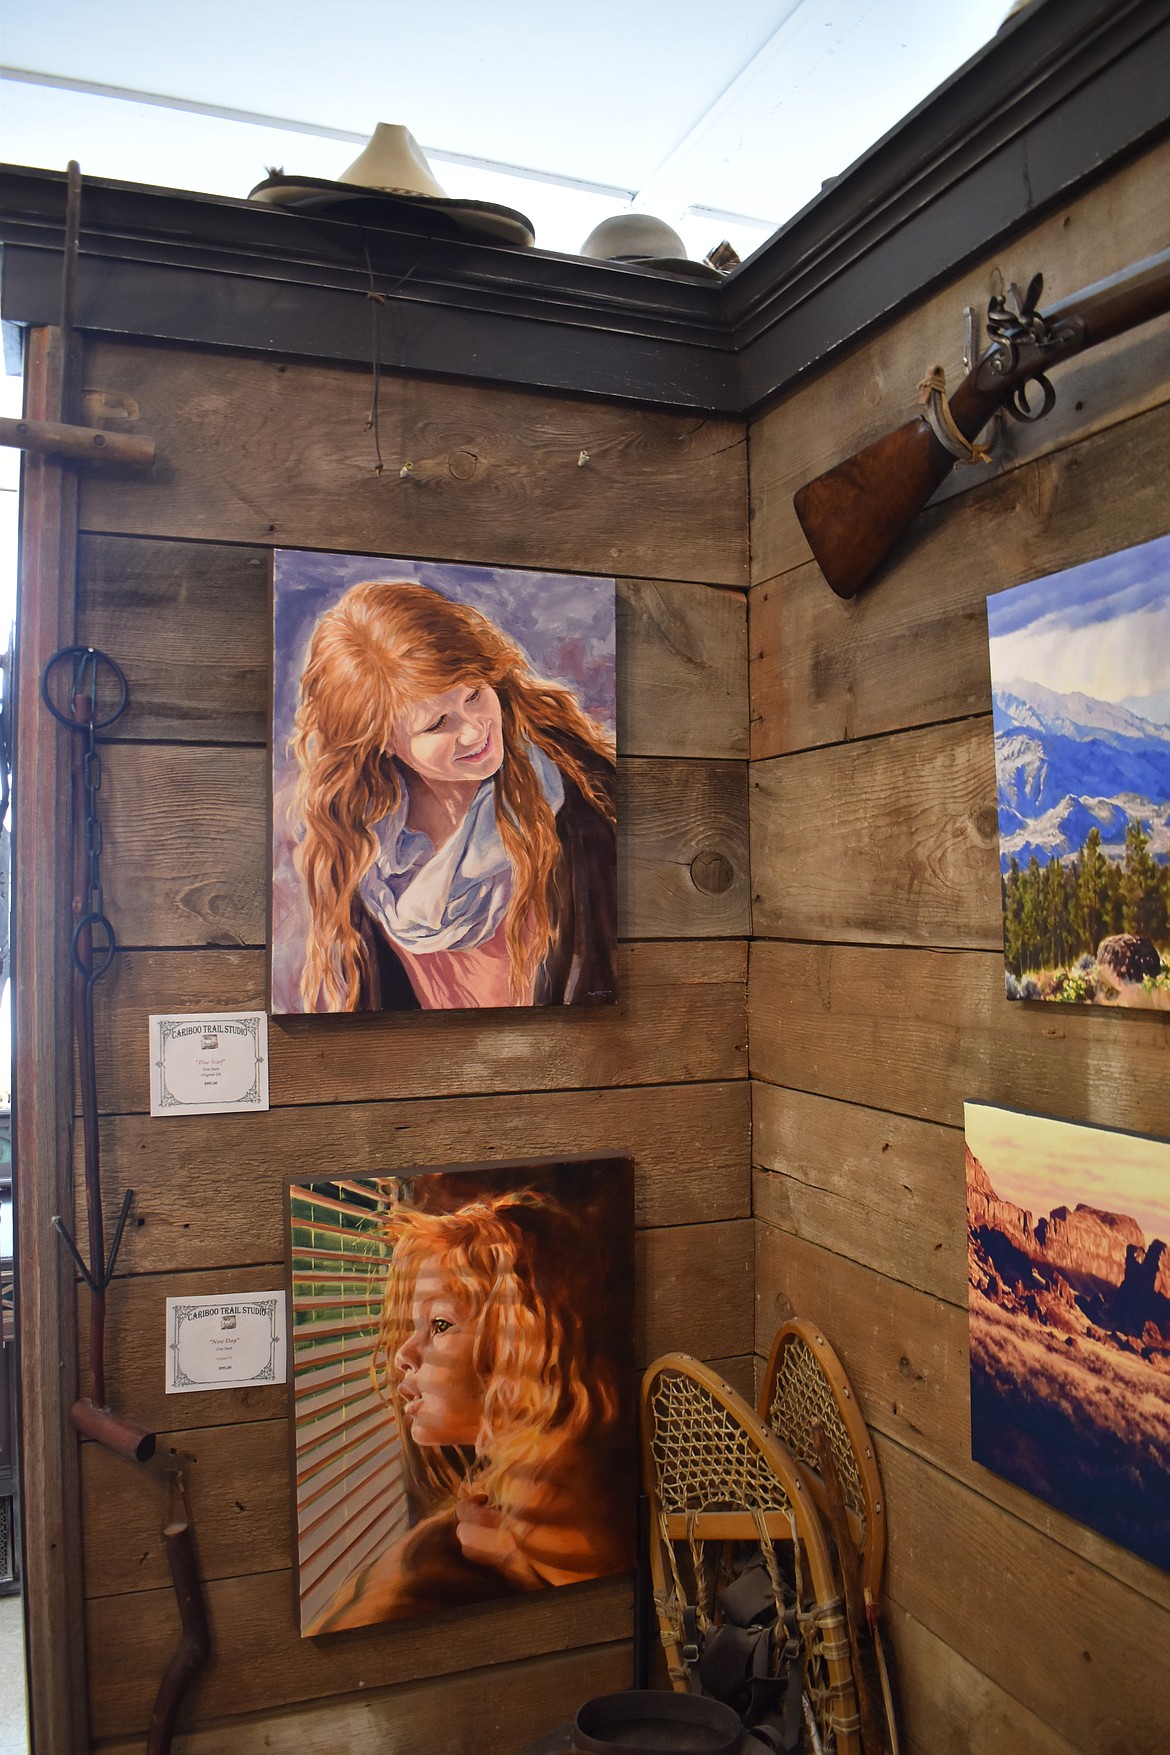 At Cariboo Trail Studio, Don Nutt’s original artwork shares space with an eclectic collection of Old West memorabilia.